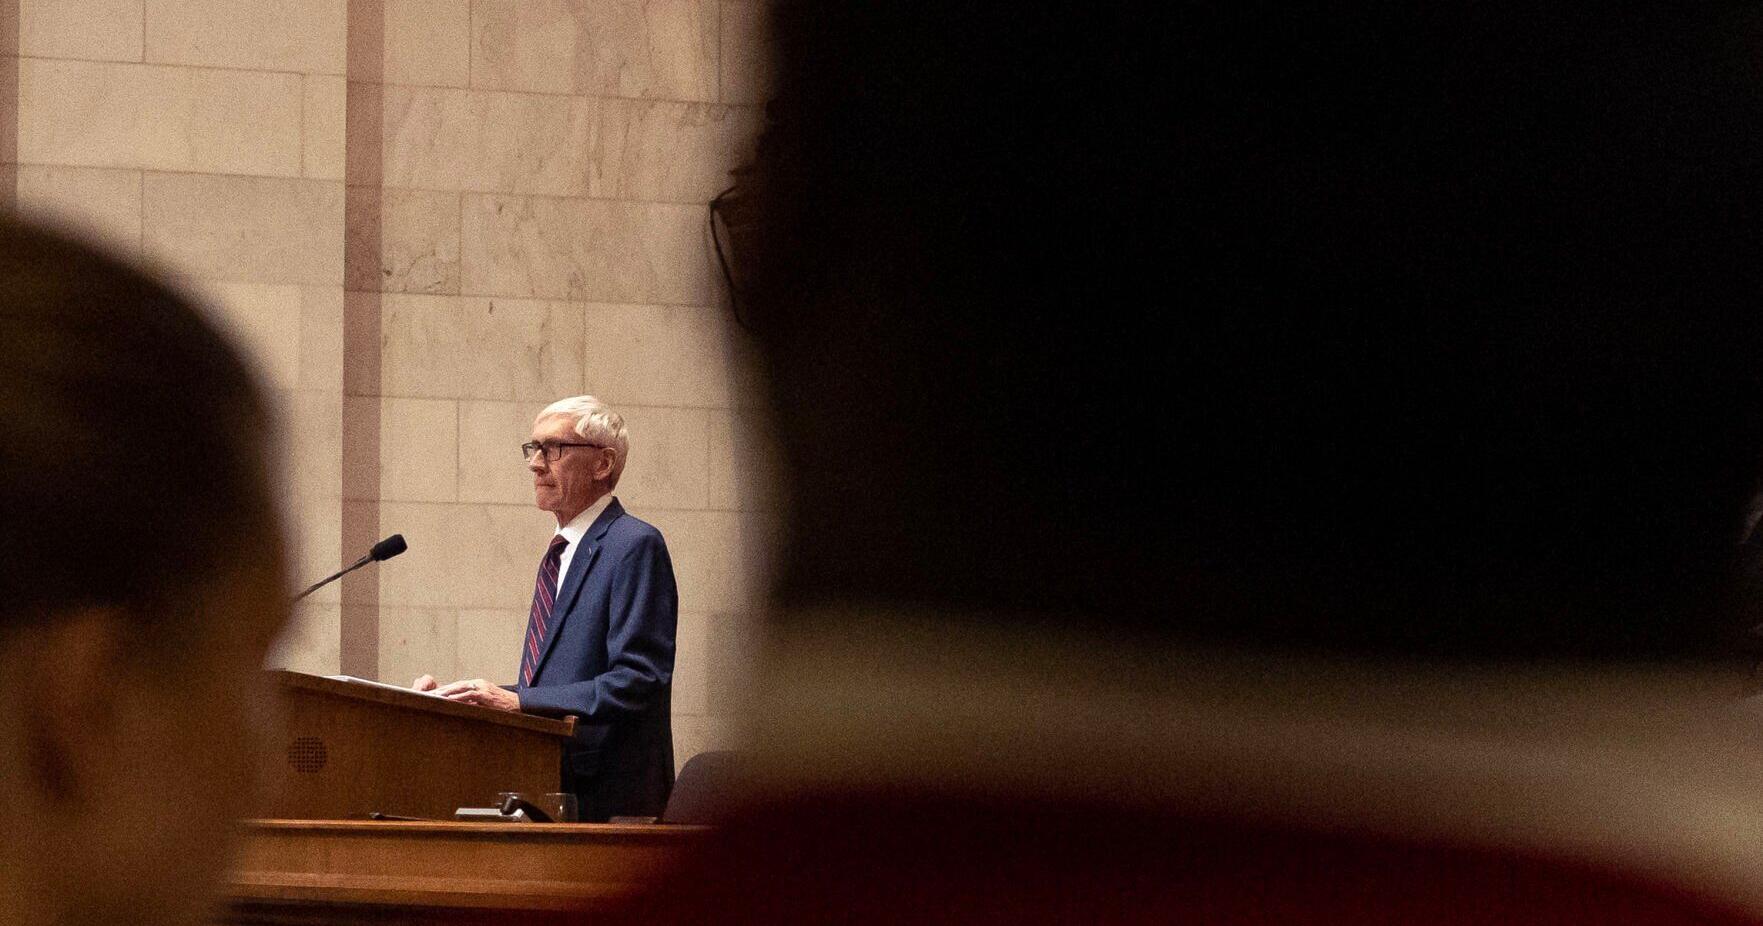 Wisconsin's largest business group sues Gov. Evers over veto to boost school funding for 400 years